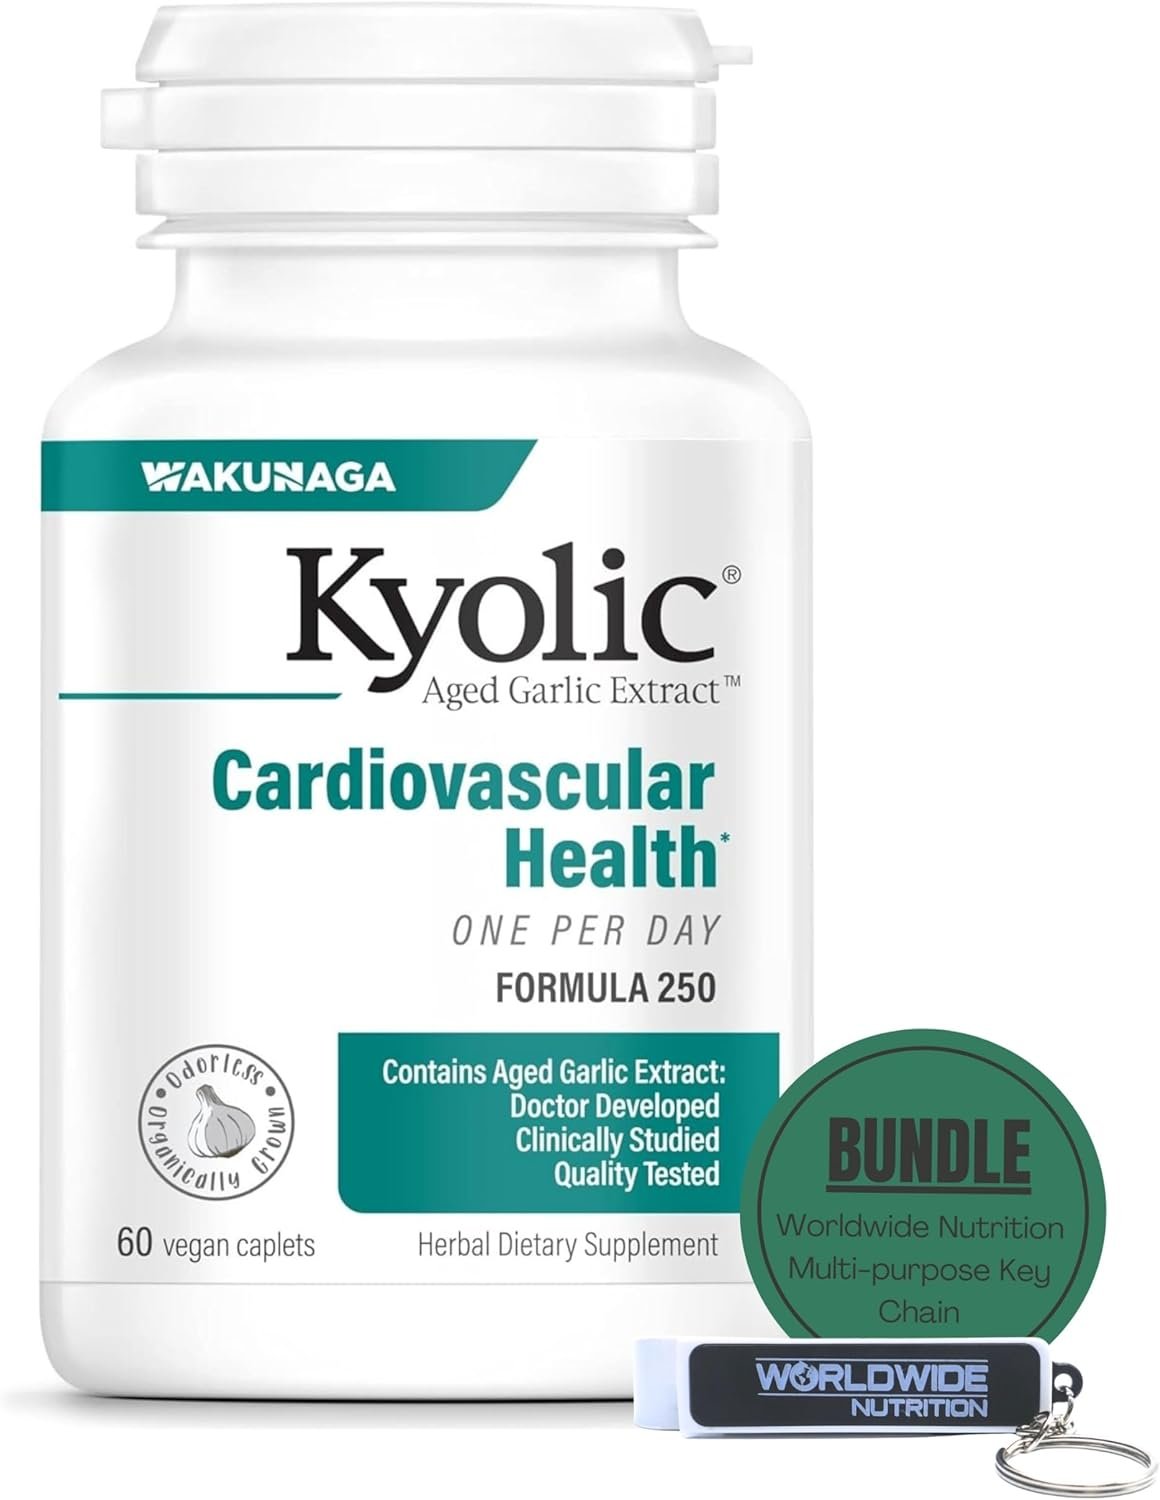 Worldwide Nutrition Bundle, 2 Items: Kyolic Aged Garlic Extract Formula 250, Cardiovascular Health, One Per Day, 60 Vegan Capsules and Multi-Purpose Key Chain (Packaging May Vary)